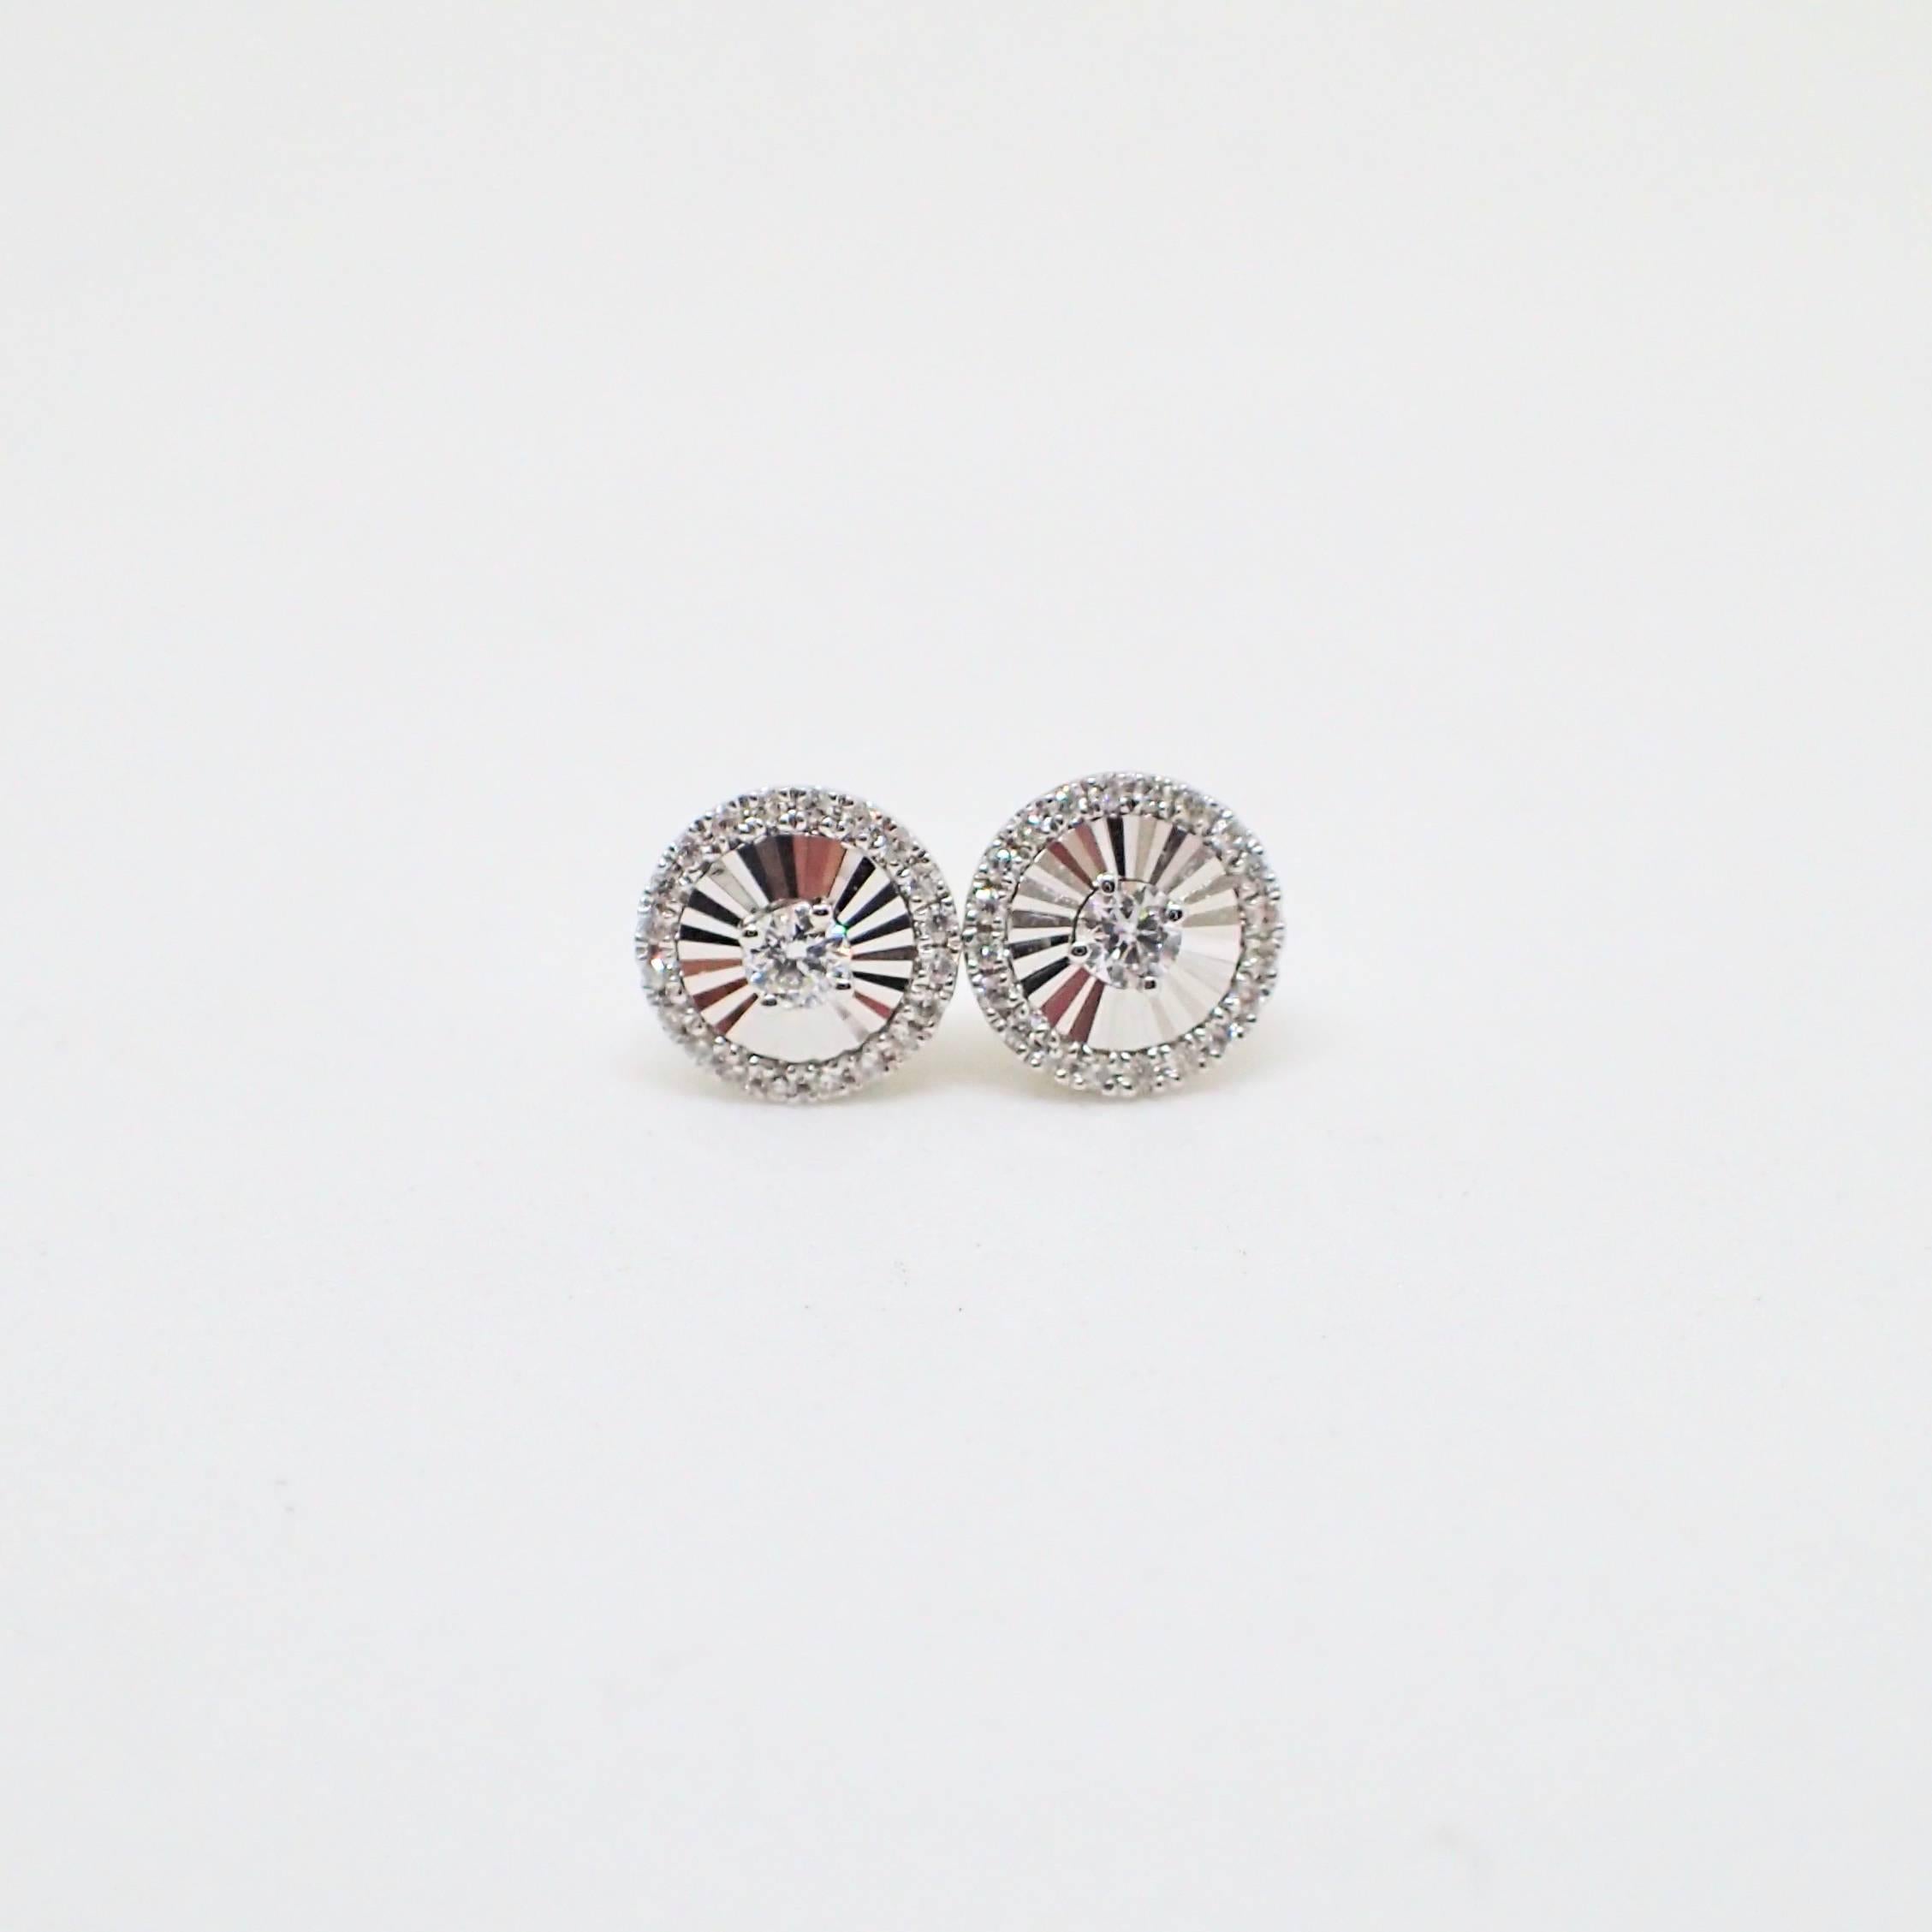 Contemporary 18 Karat White Gold Fan Style Stud Earrings Are Set with 0.19 Carat of Diamond